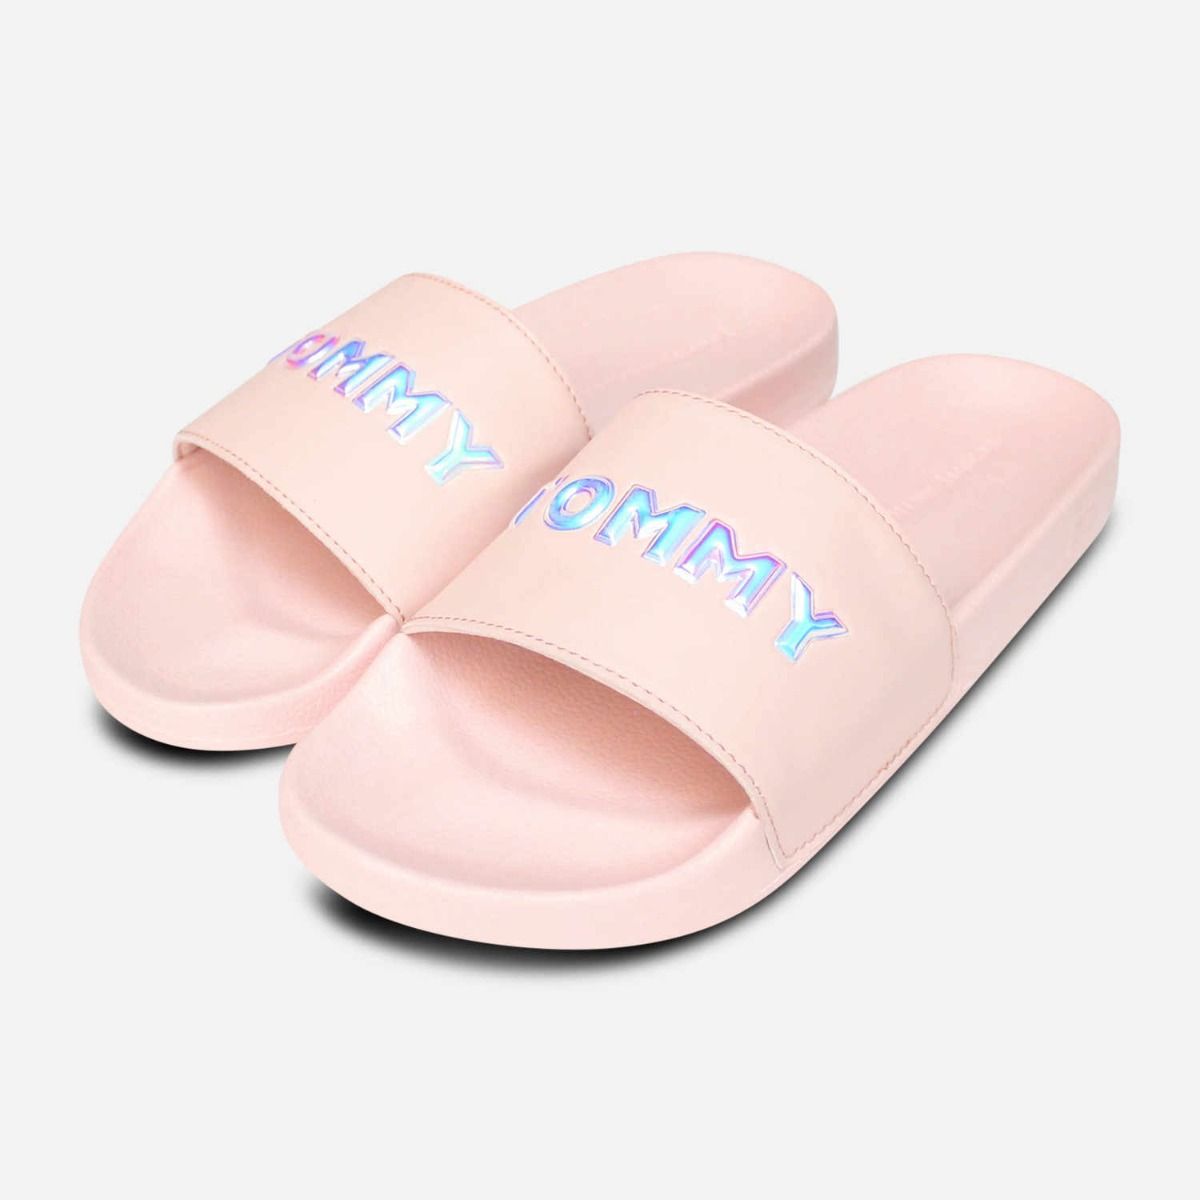 tommy jeans sliders womens